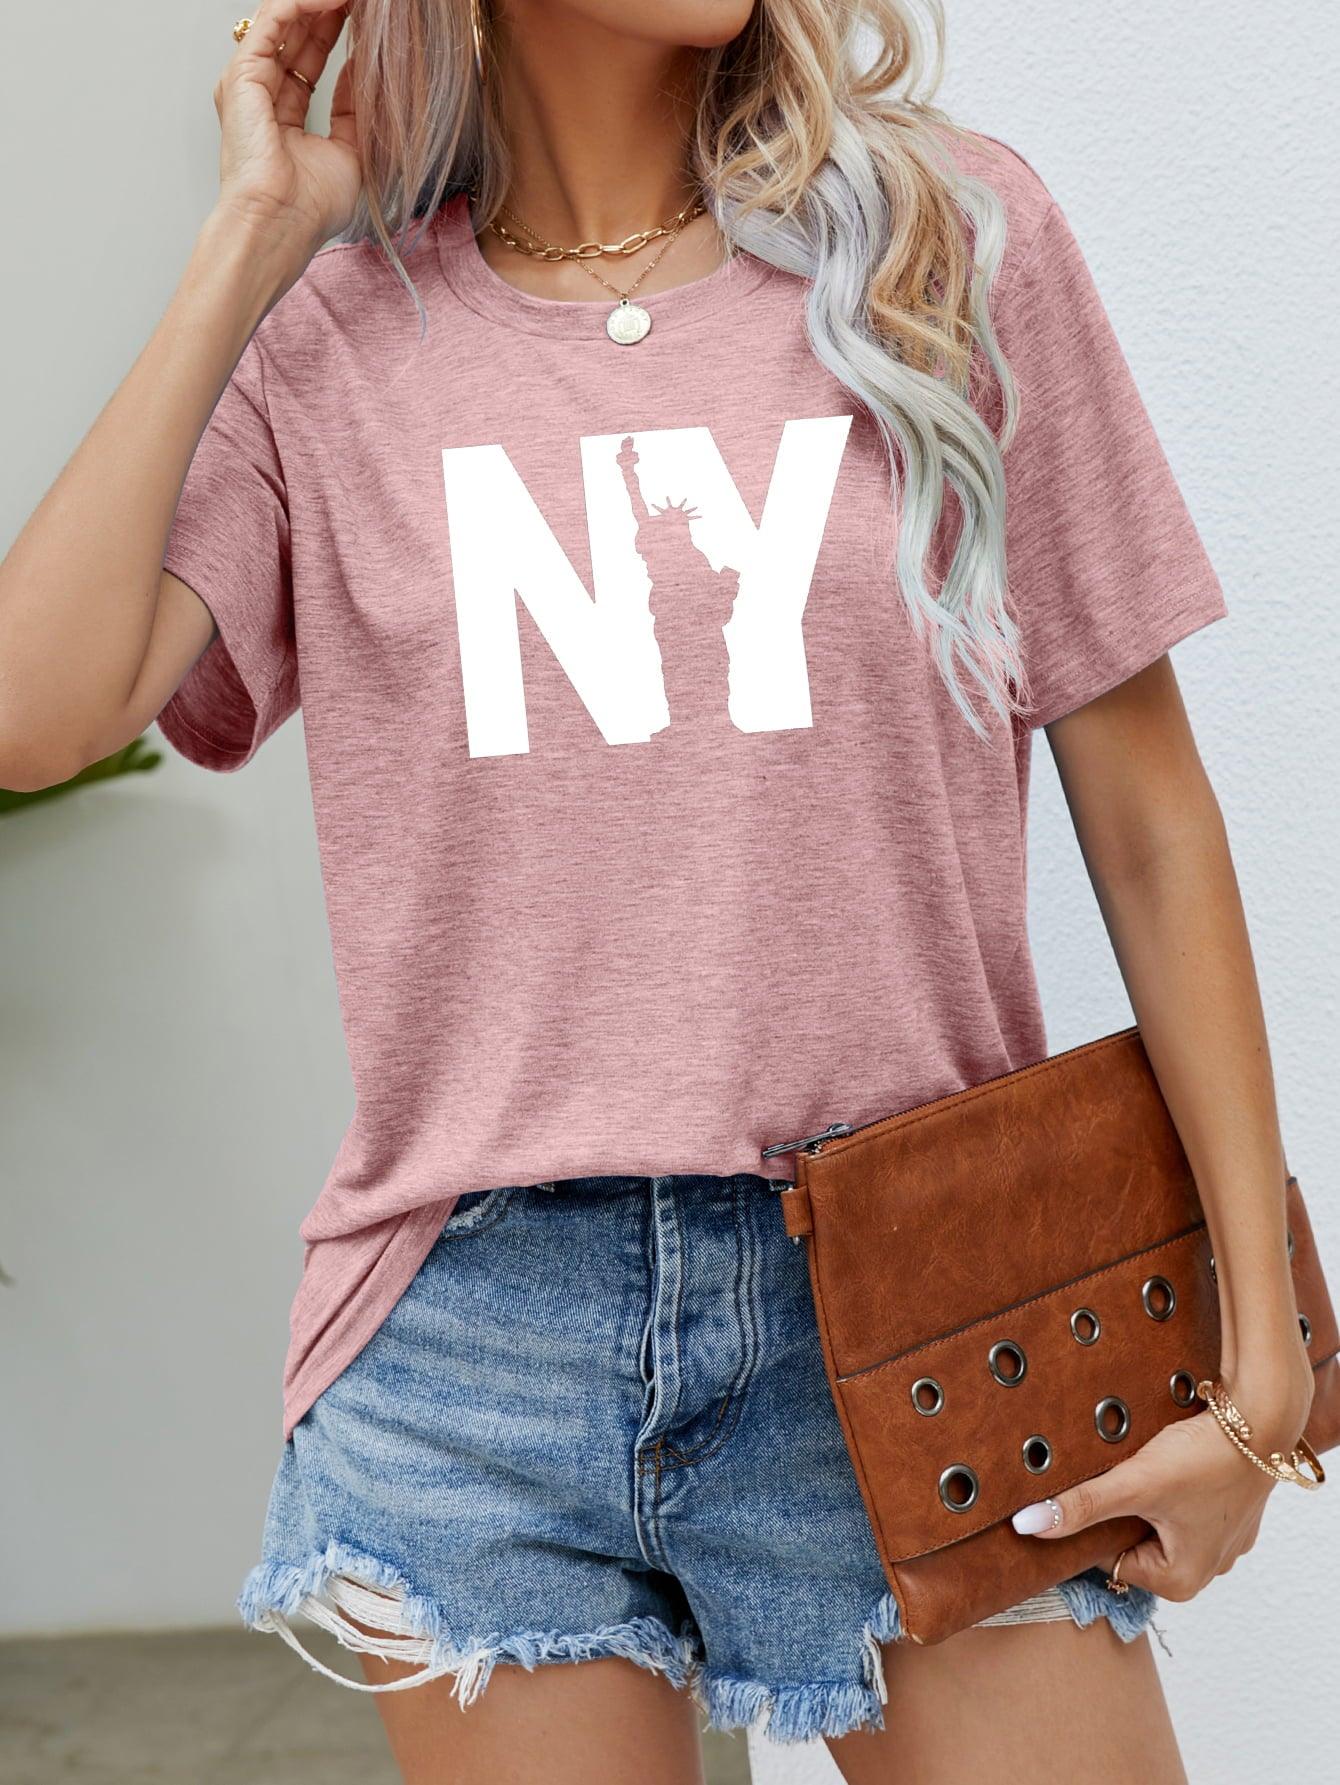 NY the Statue of Liberty Graphic Tee